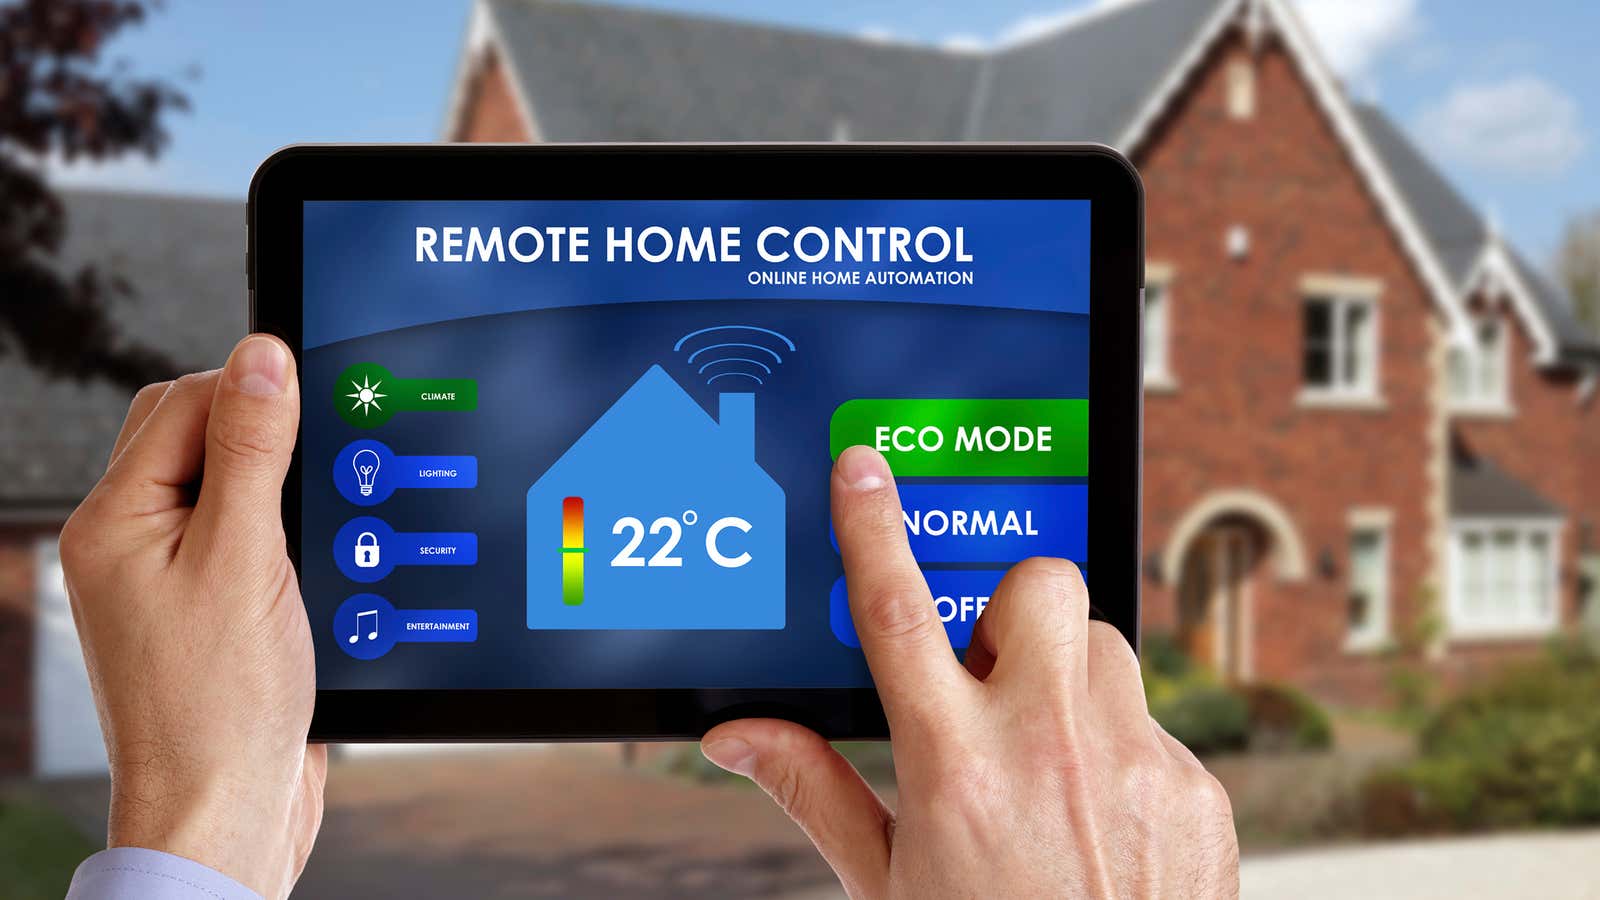 Holding a smart energy controller or remote home control online home automation system on a digital tablet. All screen graphics made up.